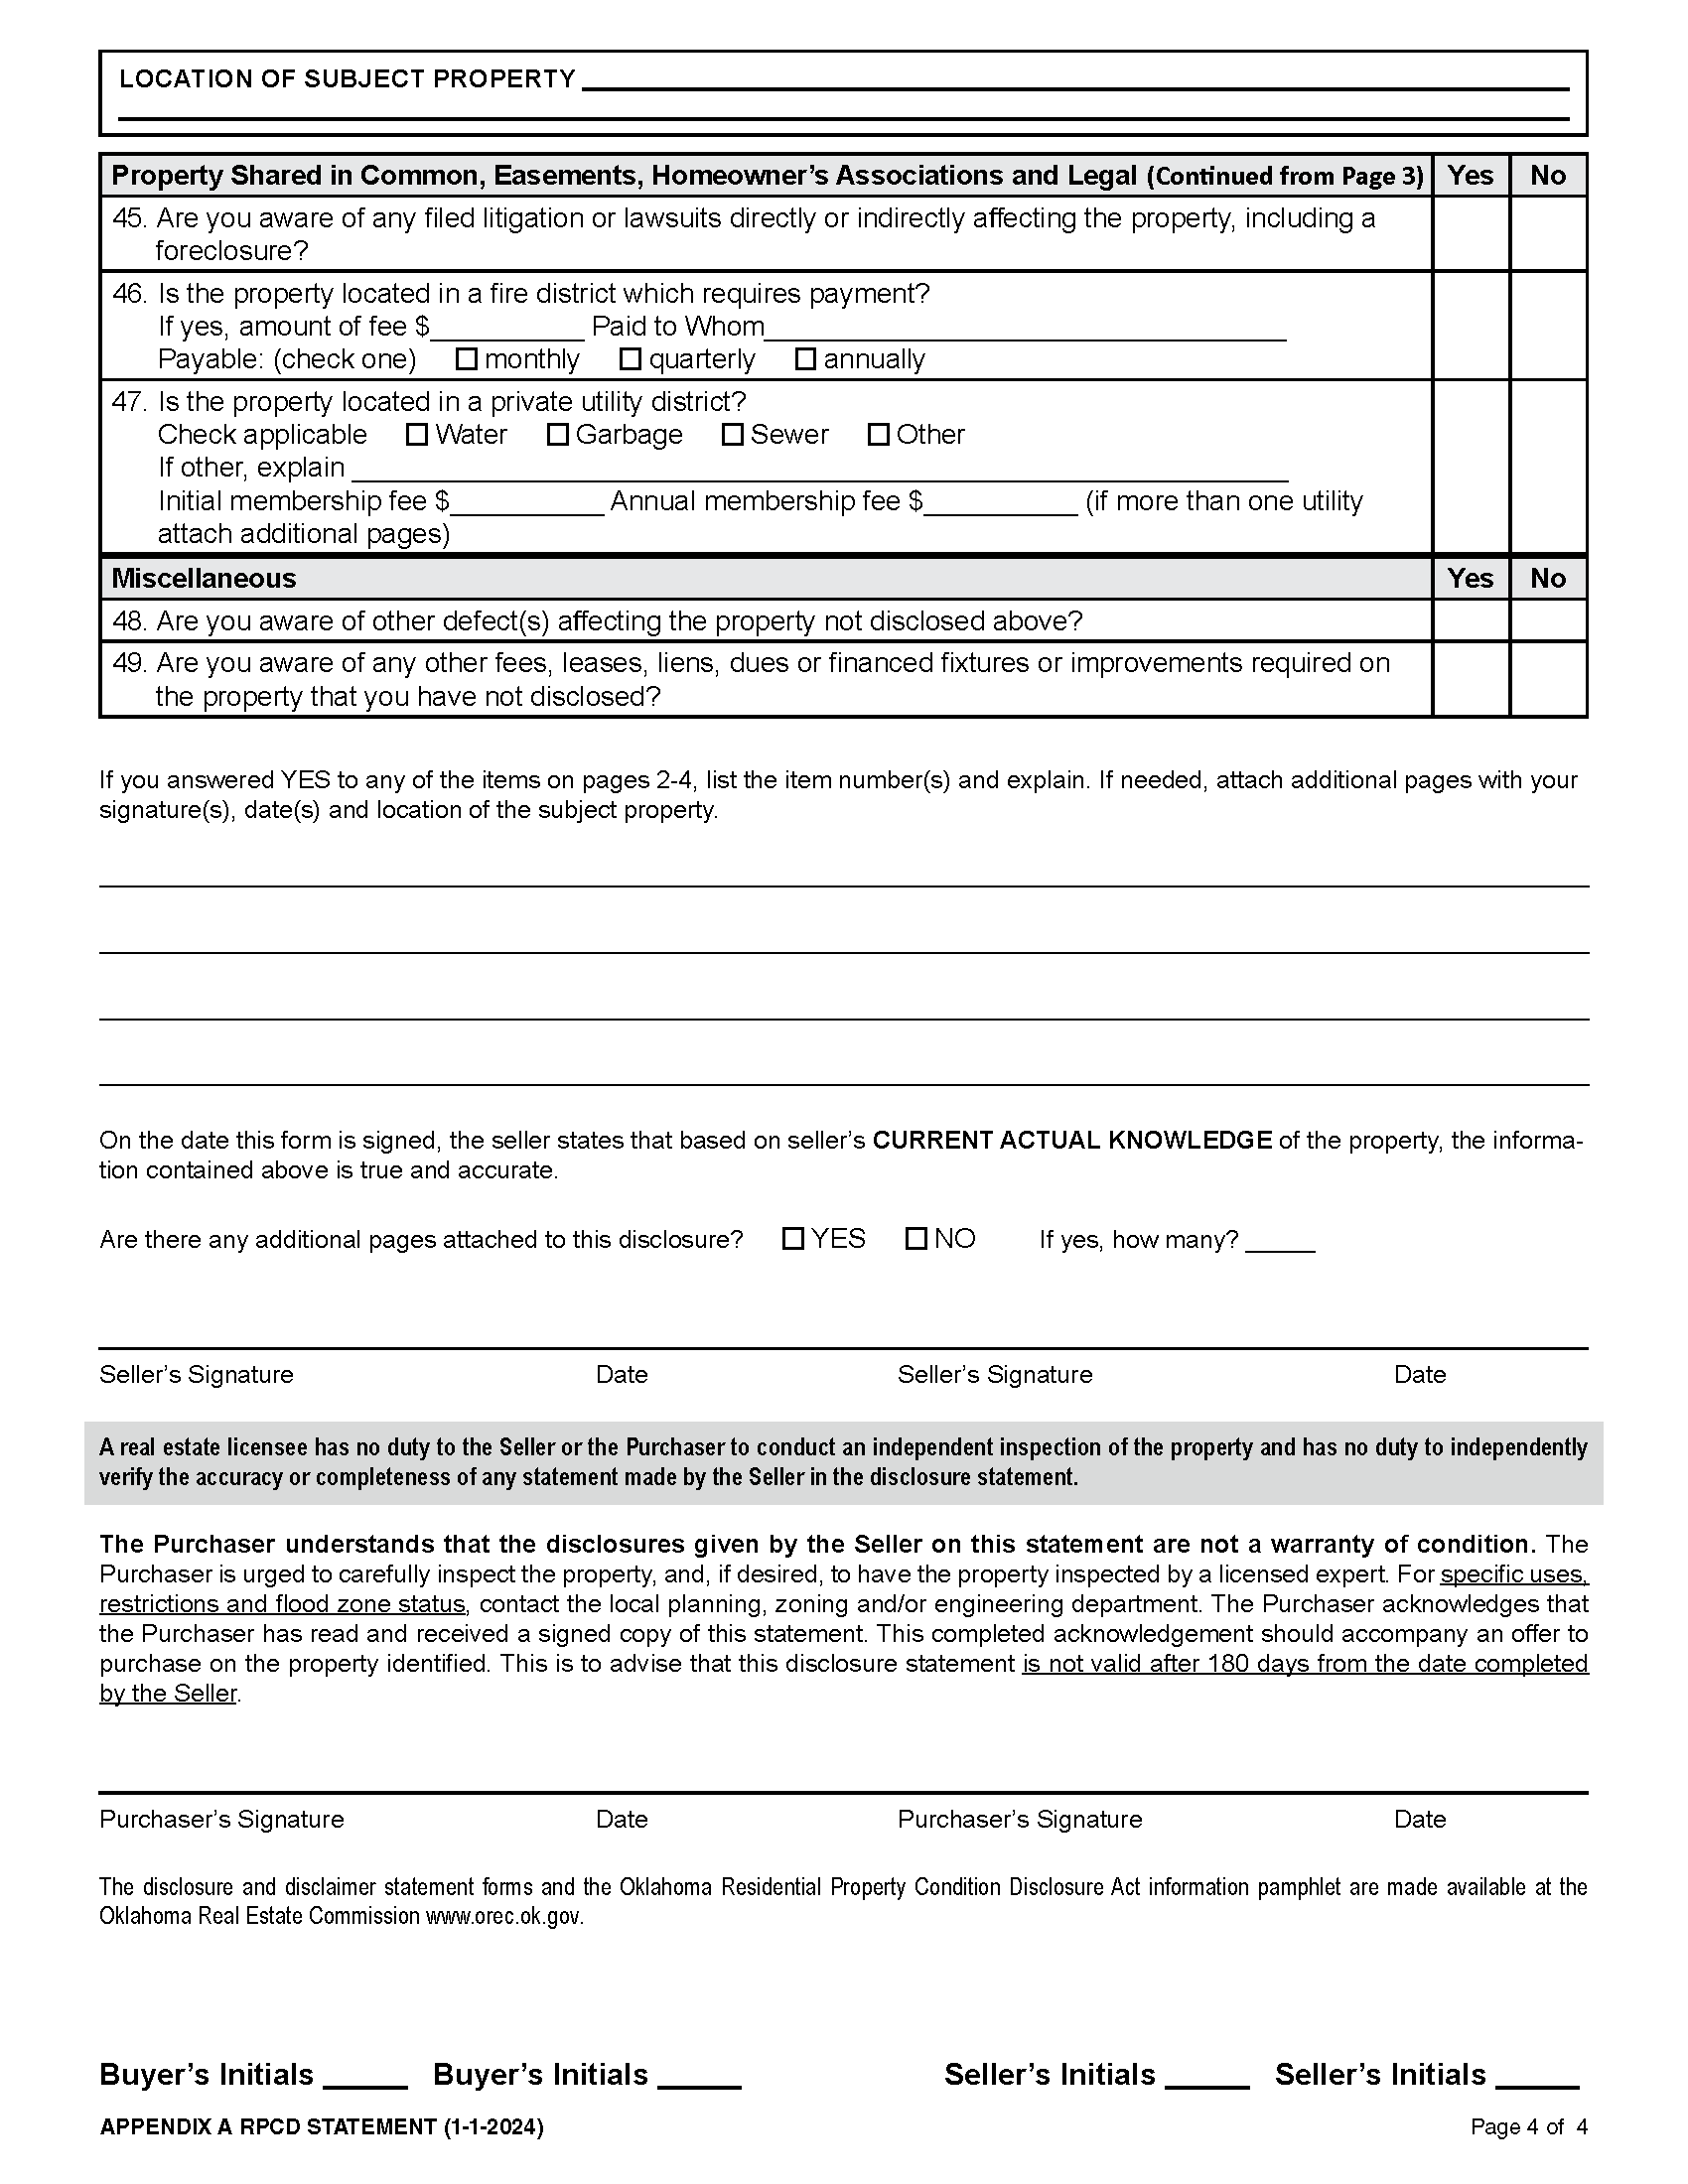 OKLAHOMA RESIDENTIAL PROPERTY CONDITION DISCLOSURE STATEMENT - Page 4 of 4